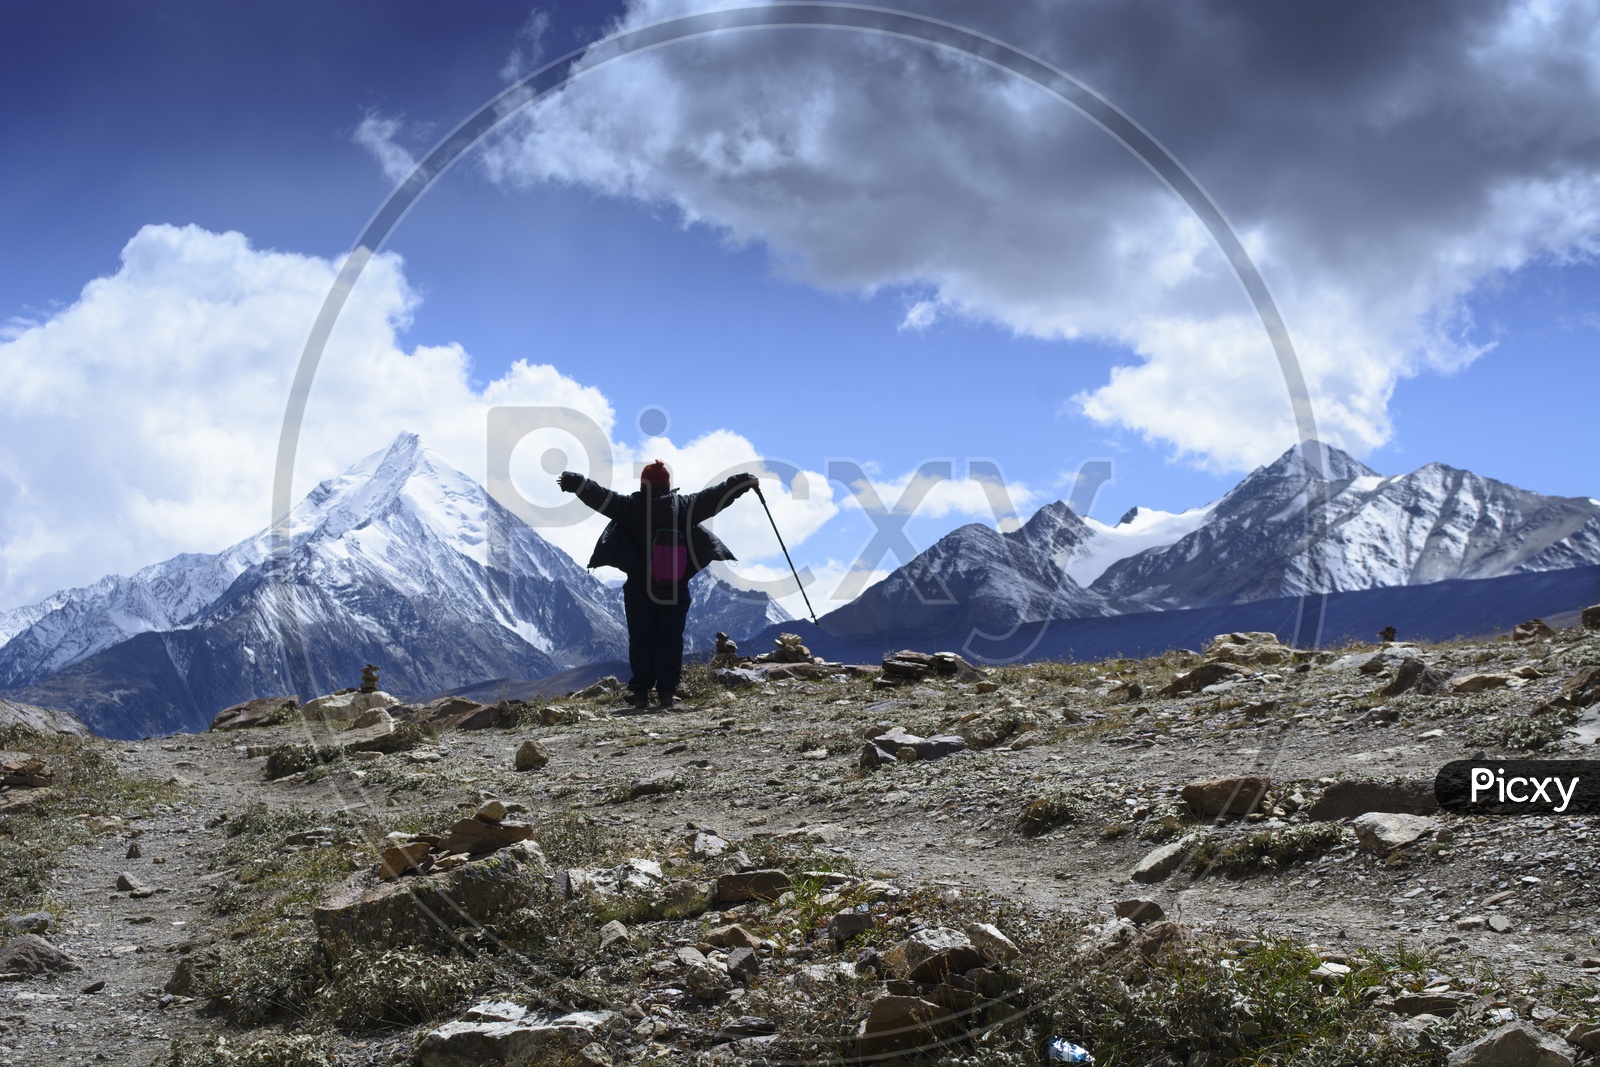 A  Woman or Trekker  Enjoying  The Snow Capped Mountain View